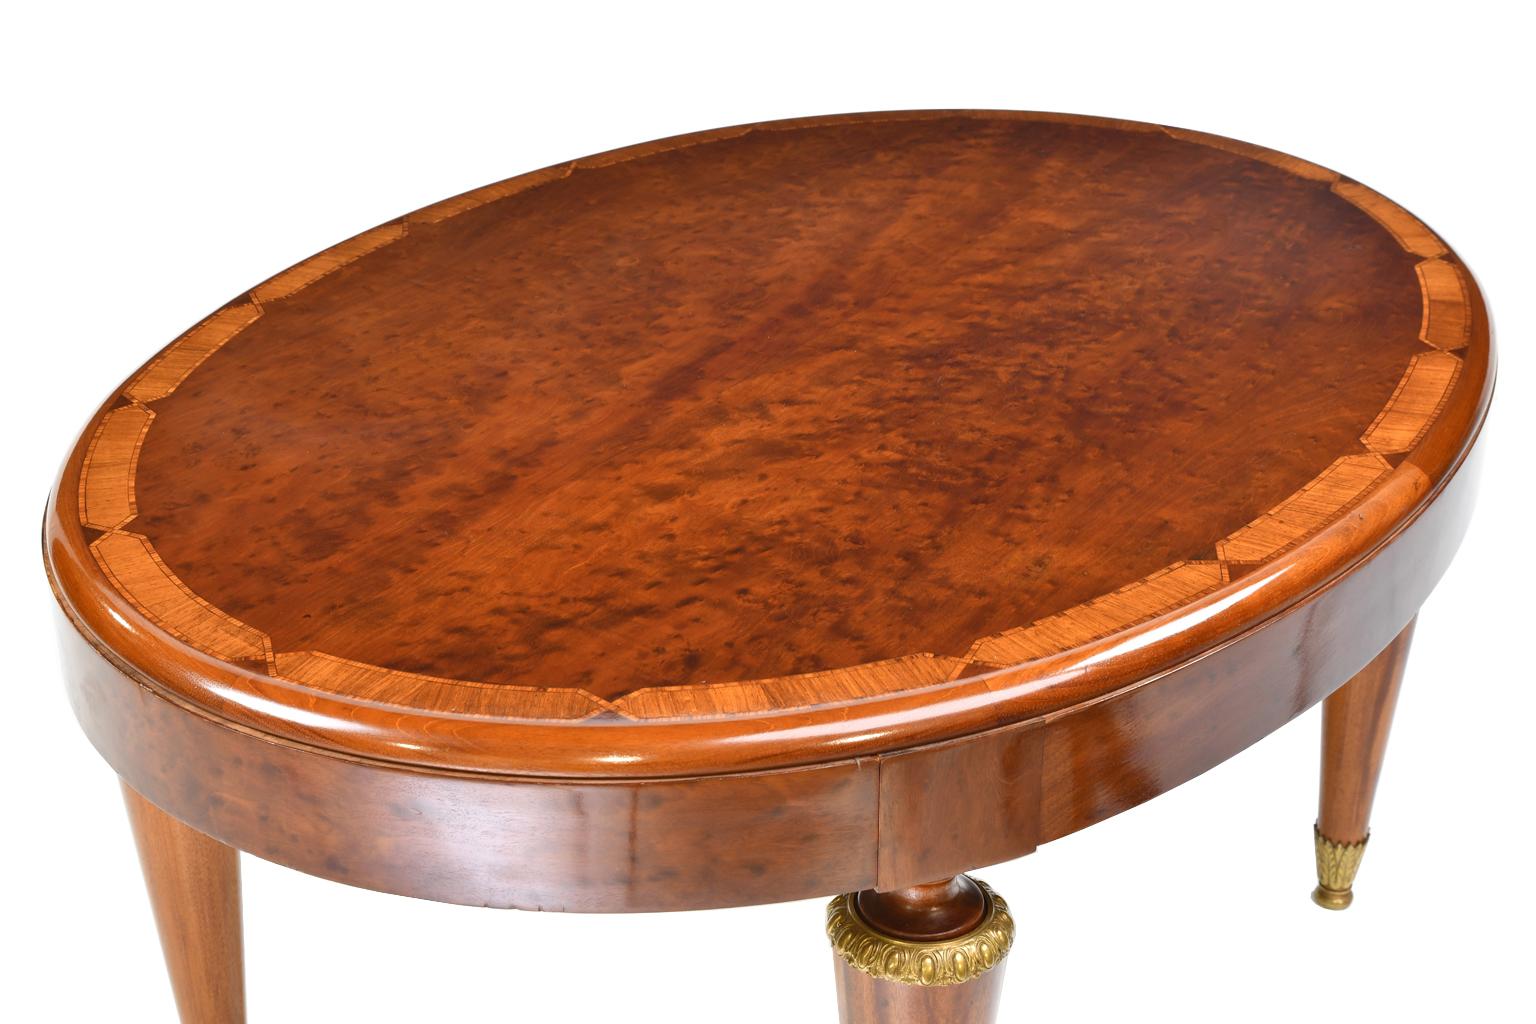 Gilt Antique European Art Deco Oval Dining Table in Polished Mahogany and Maple